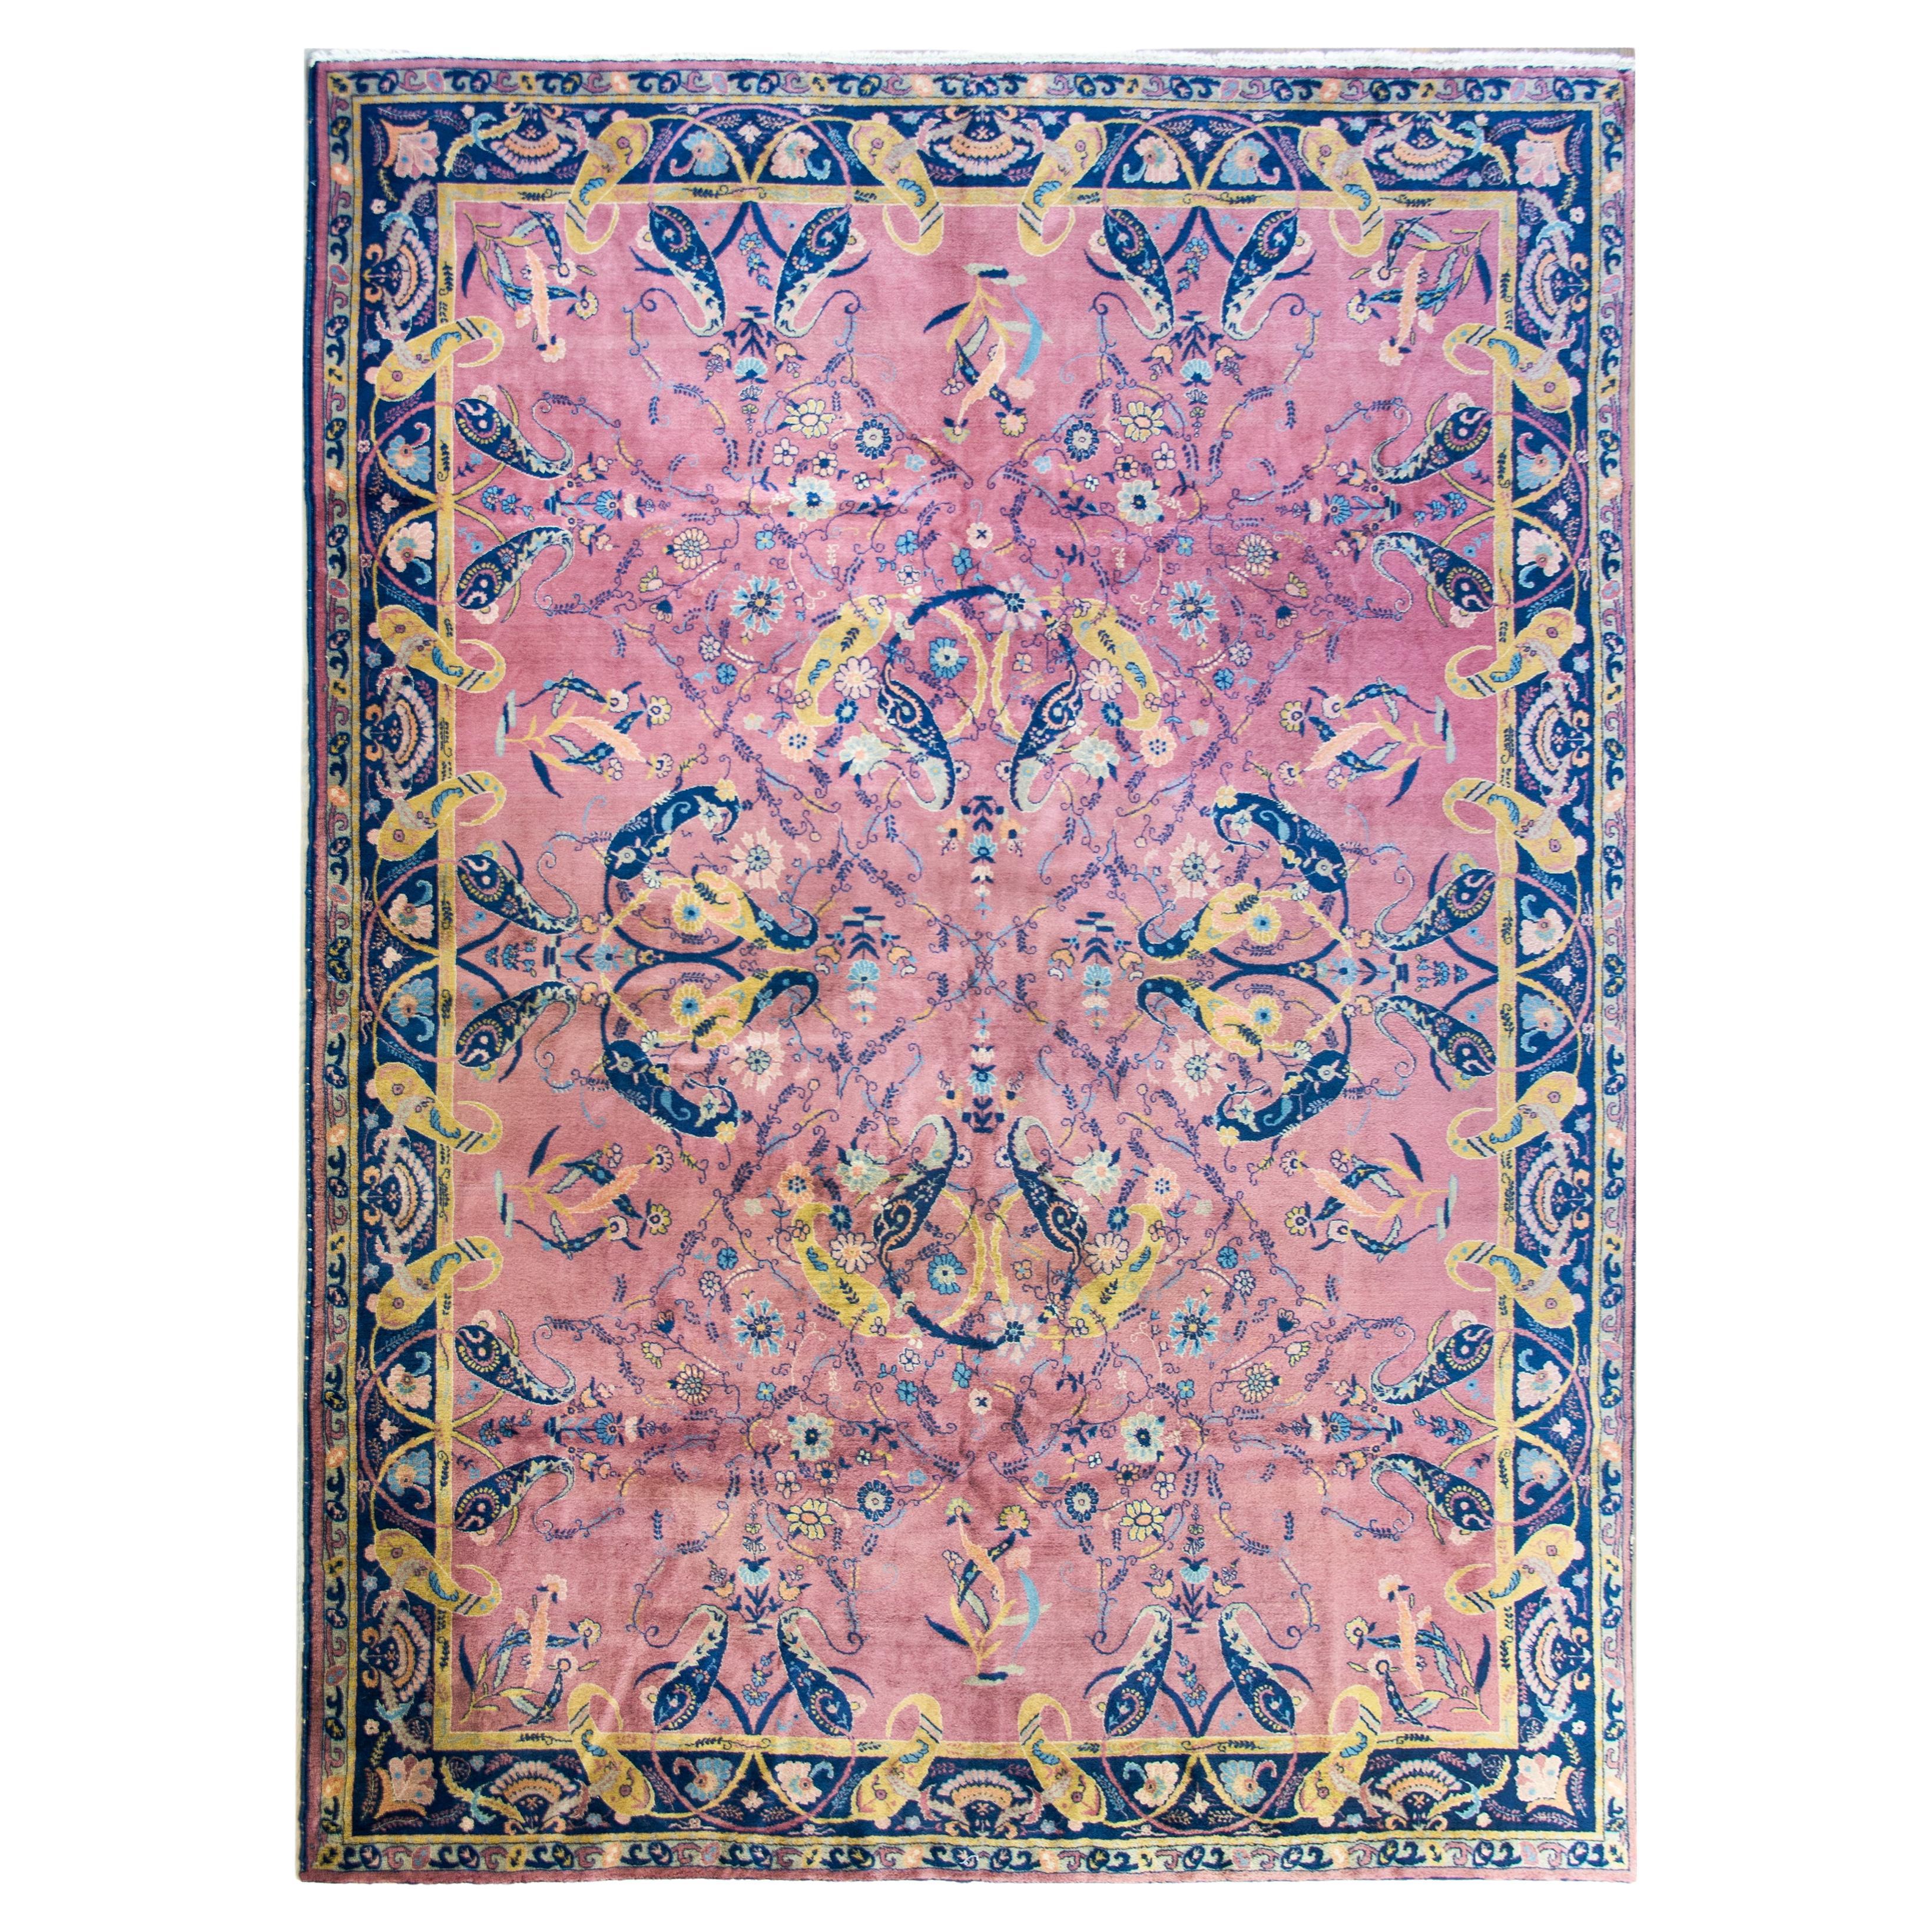 Early 20th Century Indian Lahore Rug